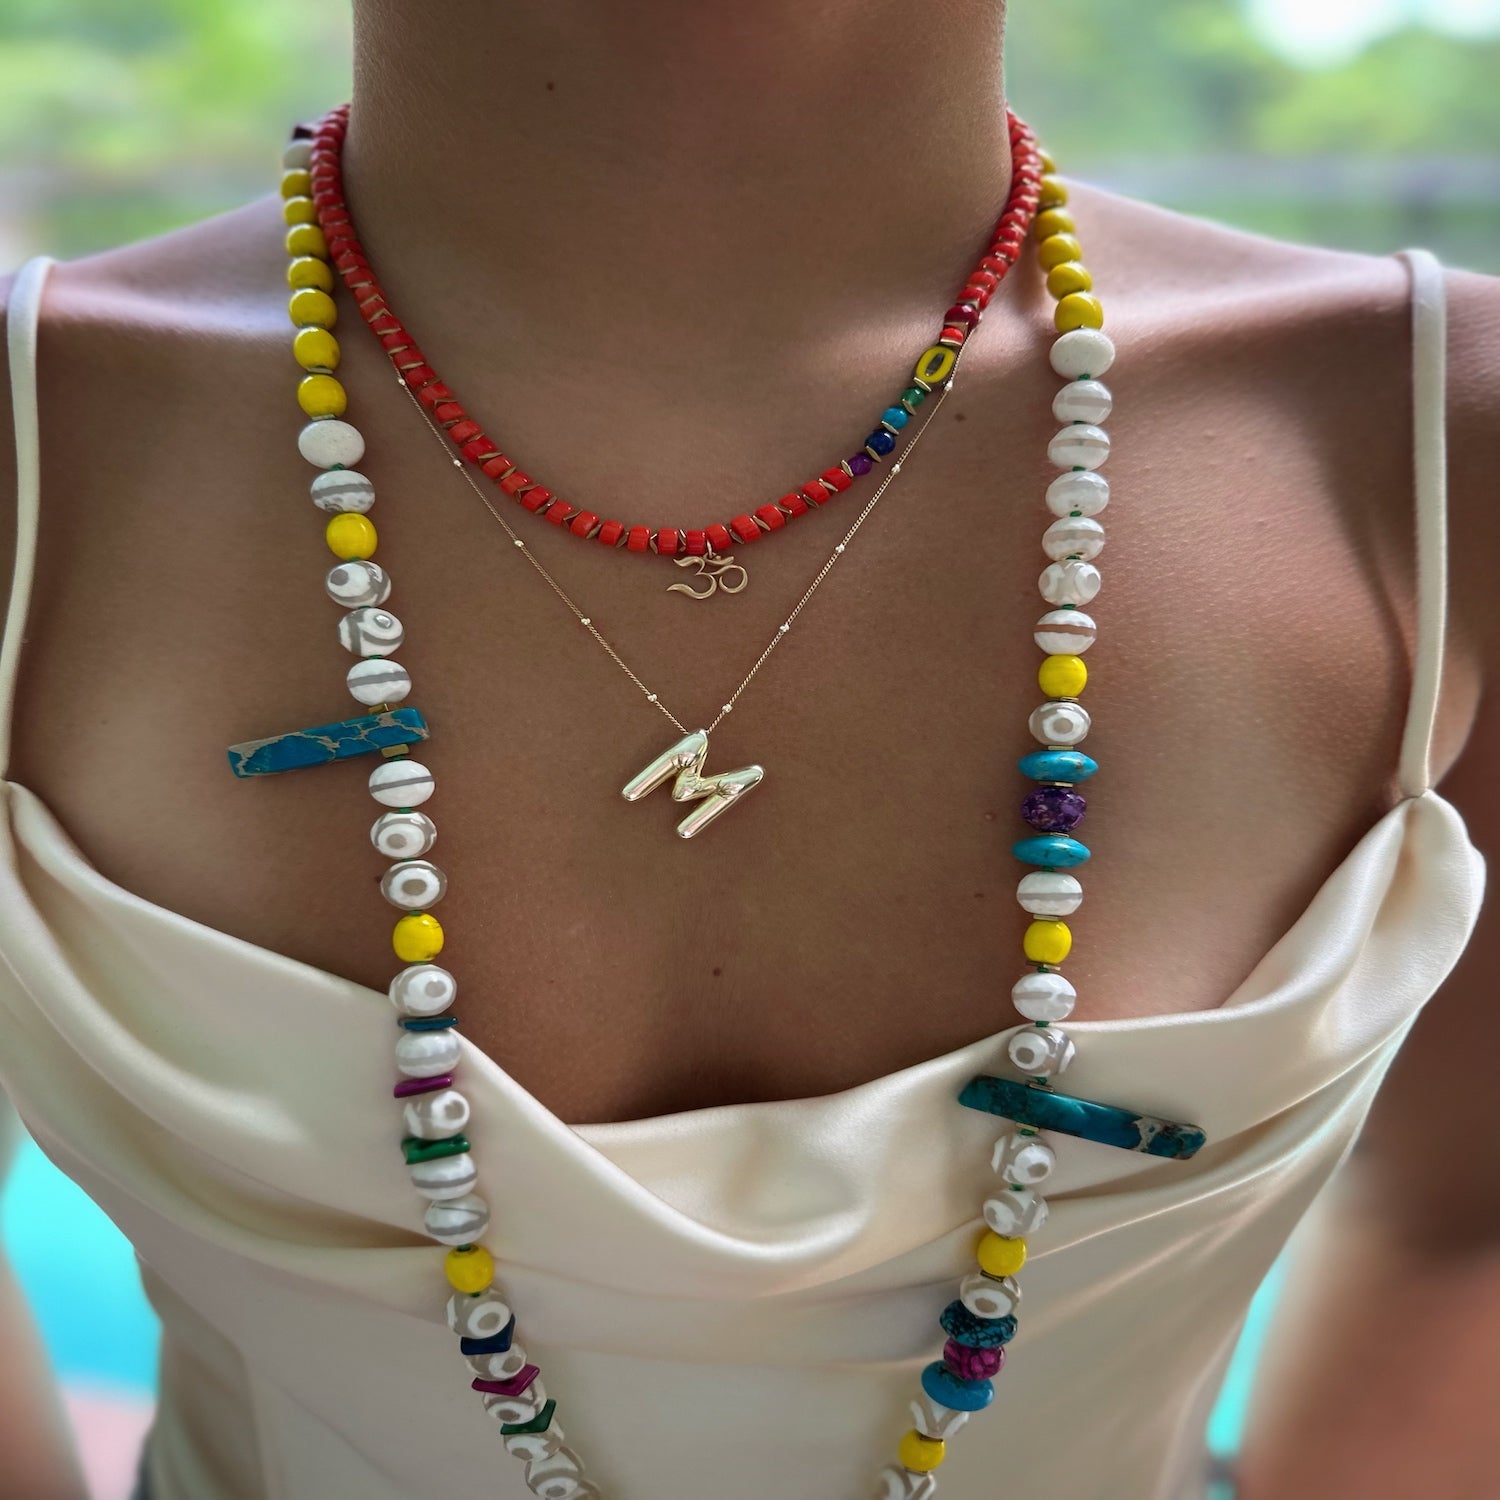 Model wearing the Chakra Necklace, exuding a sense of balance and spiritual connection with the vibrant chakra-colored beads.